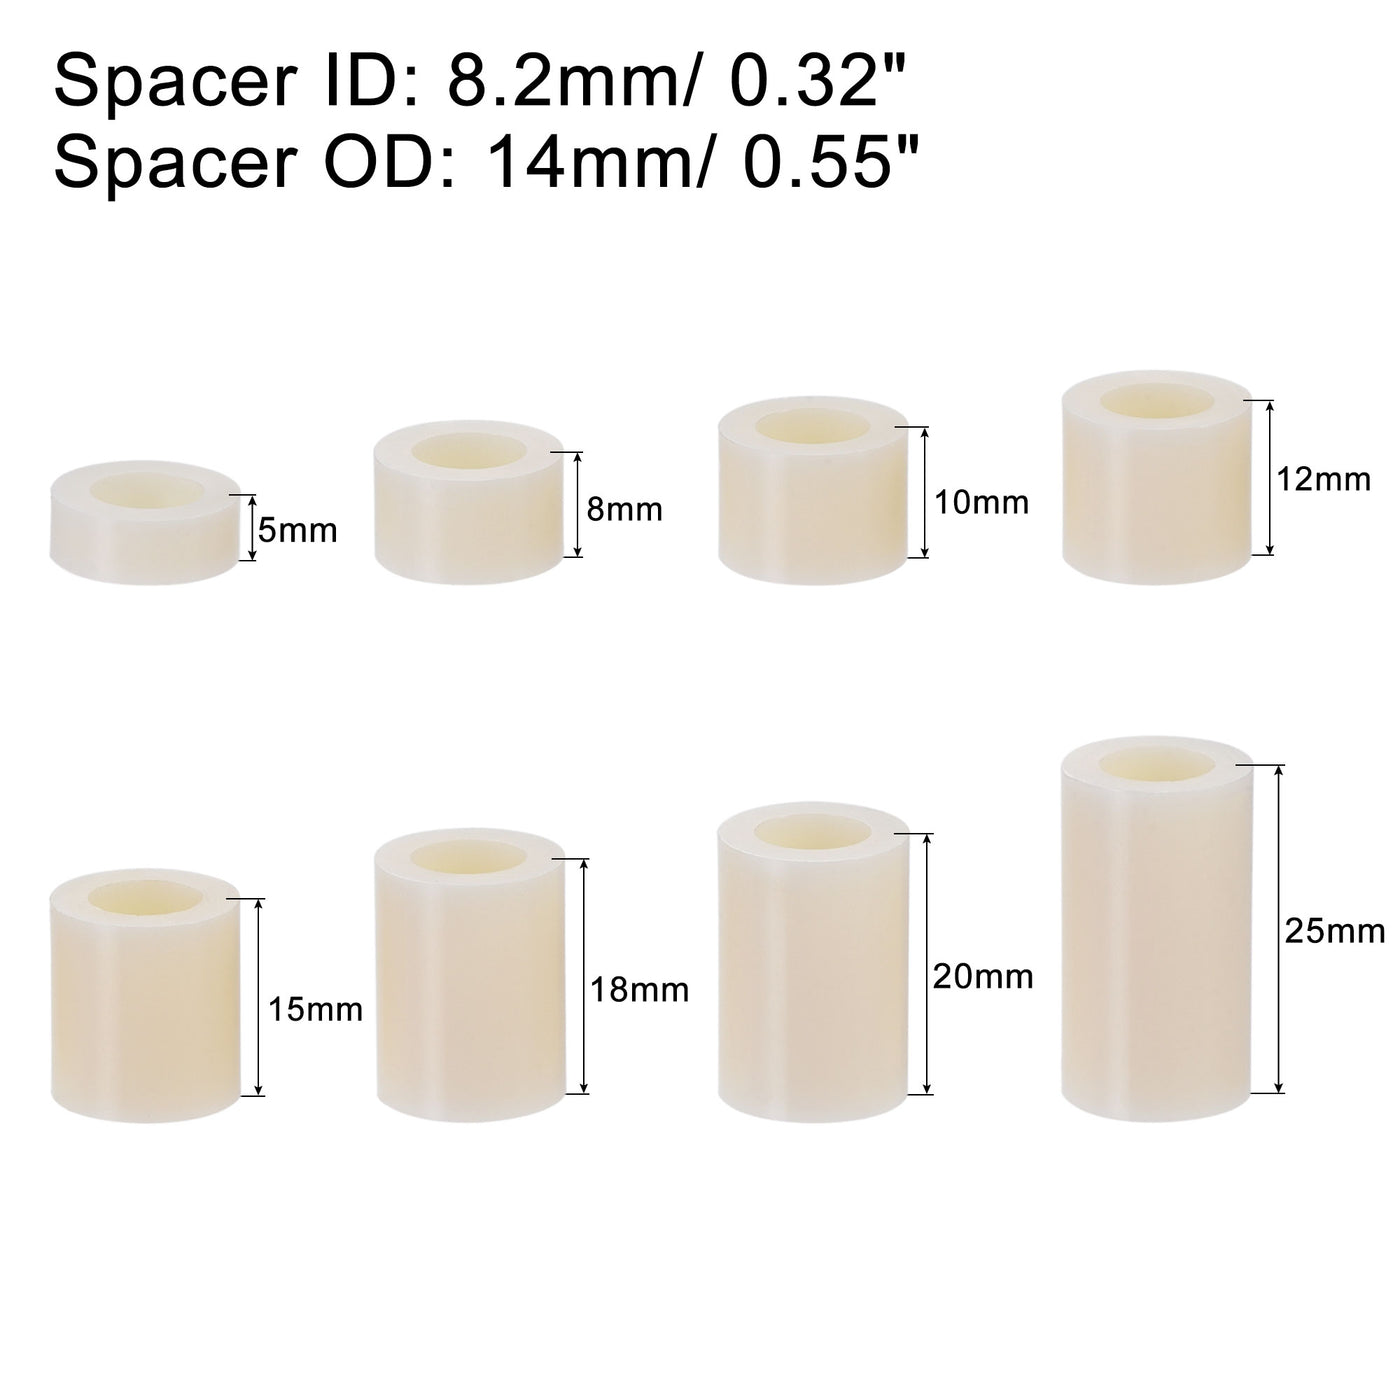 uxcell Uxcell ABS Round Spacer Assortment Kit ID 8.2mm OD 14mm, 8 Sizes Standoff, 240pcs